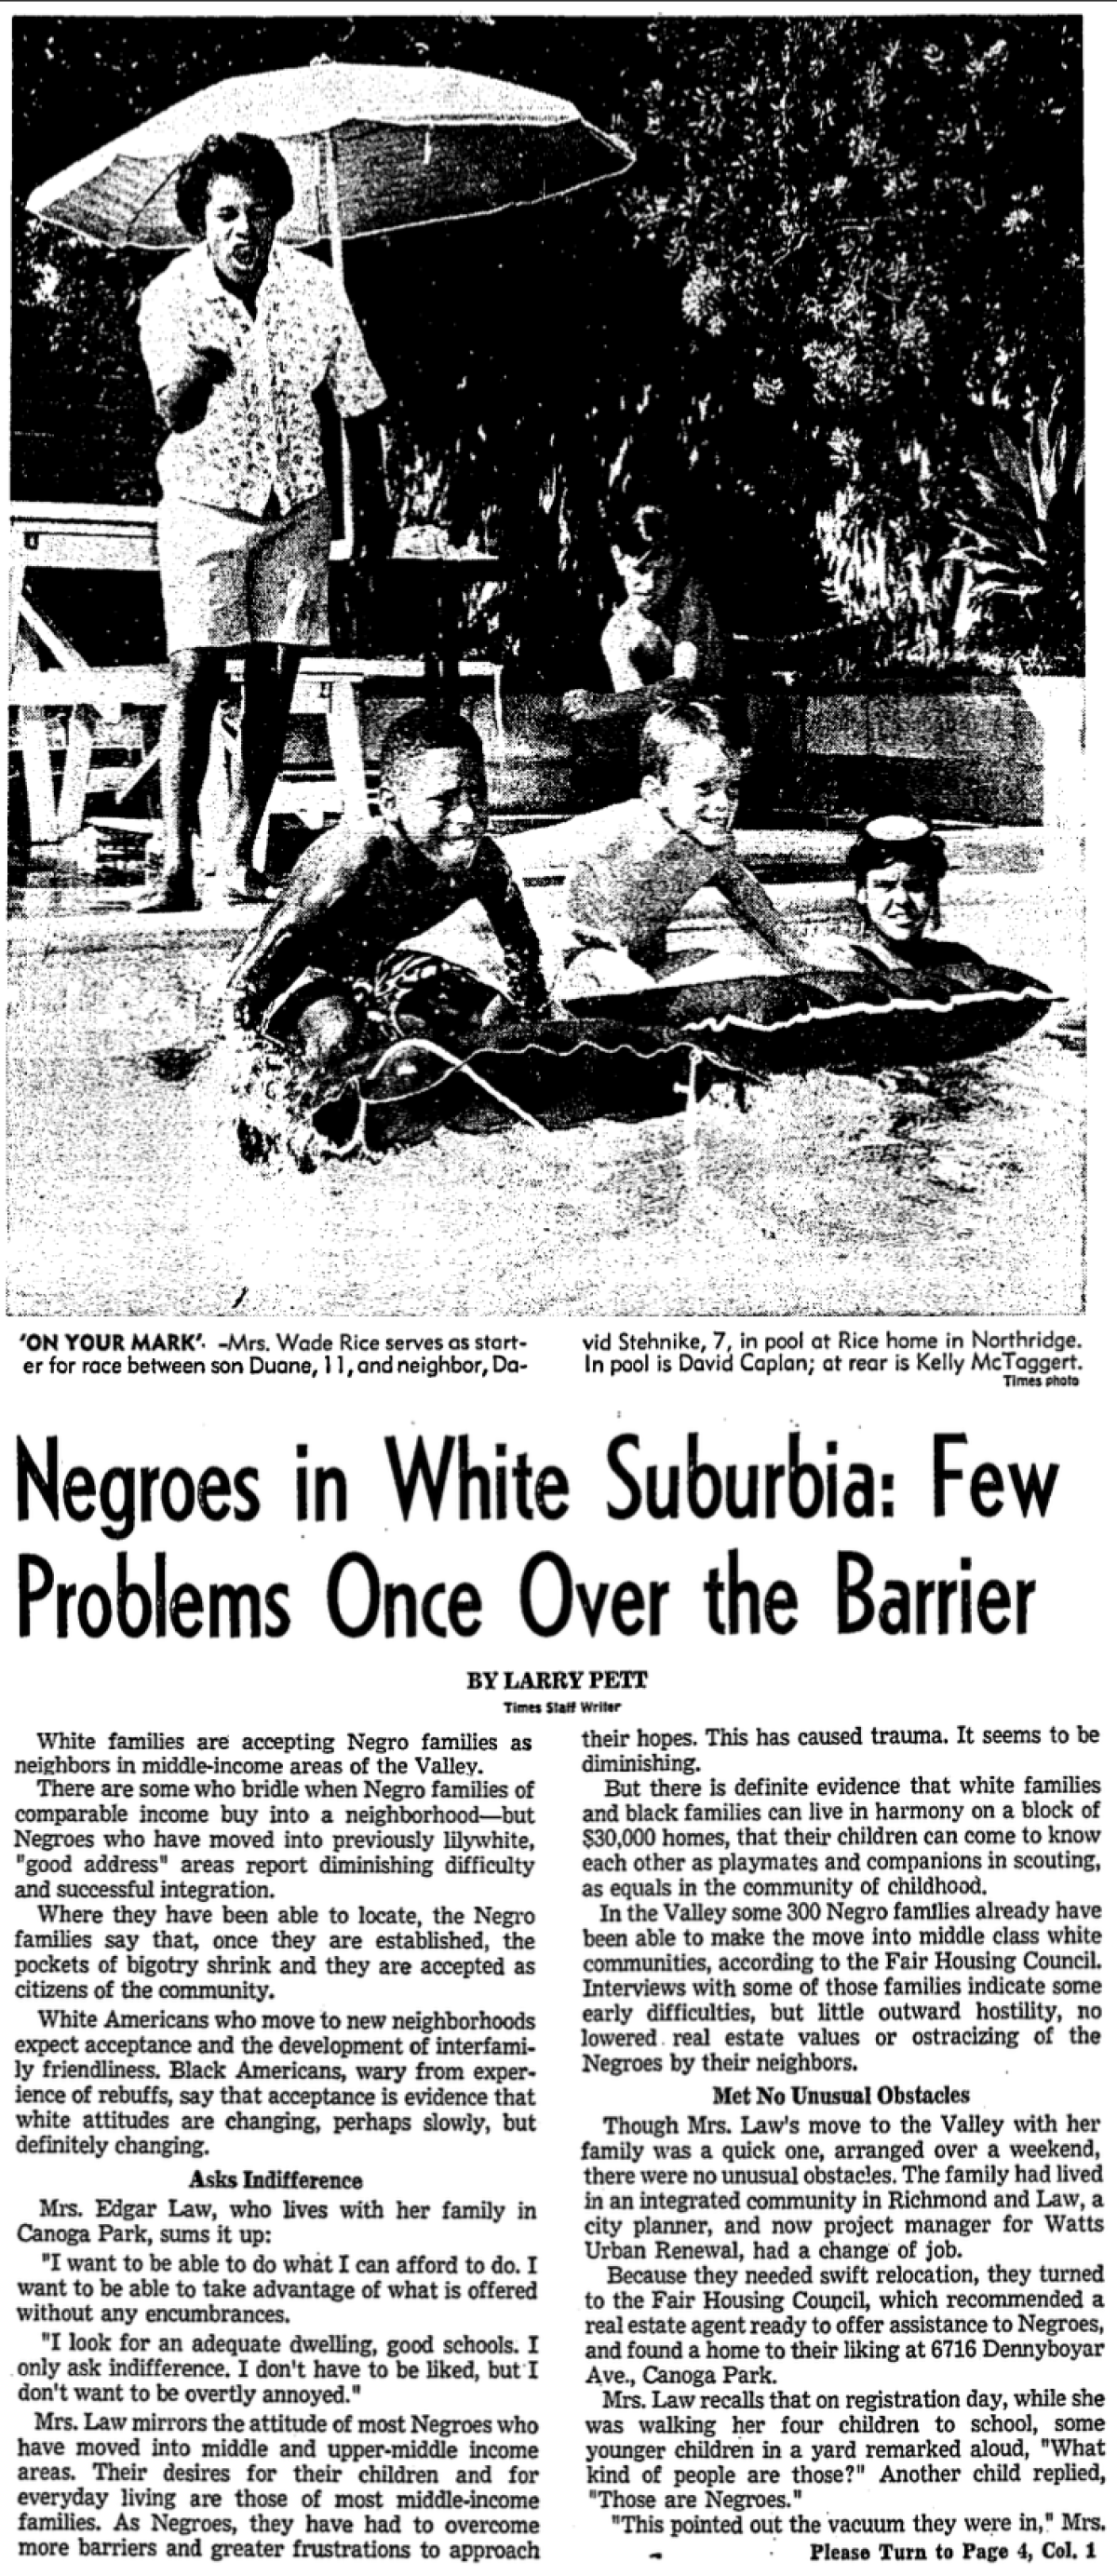 A 1968 article in The Times is headlined "Negroes in White Suburbia: Few Problems Once Over the Barrier"